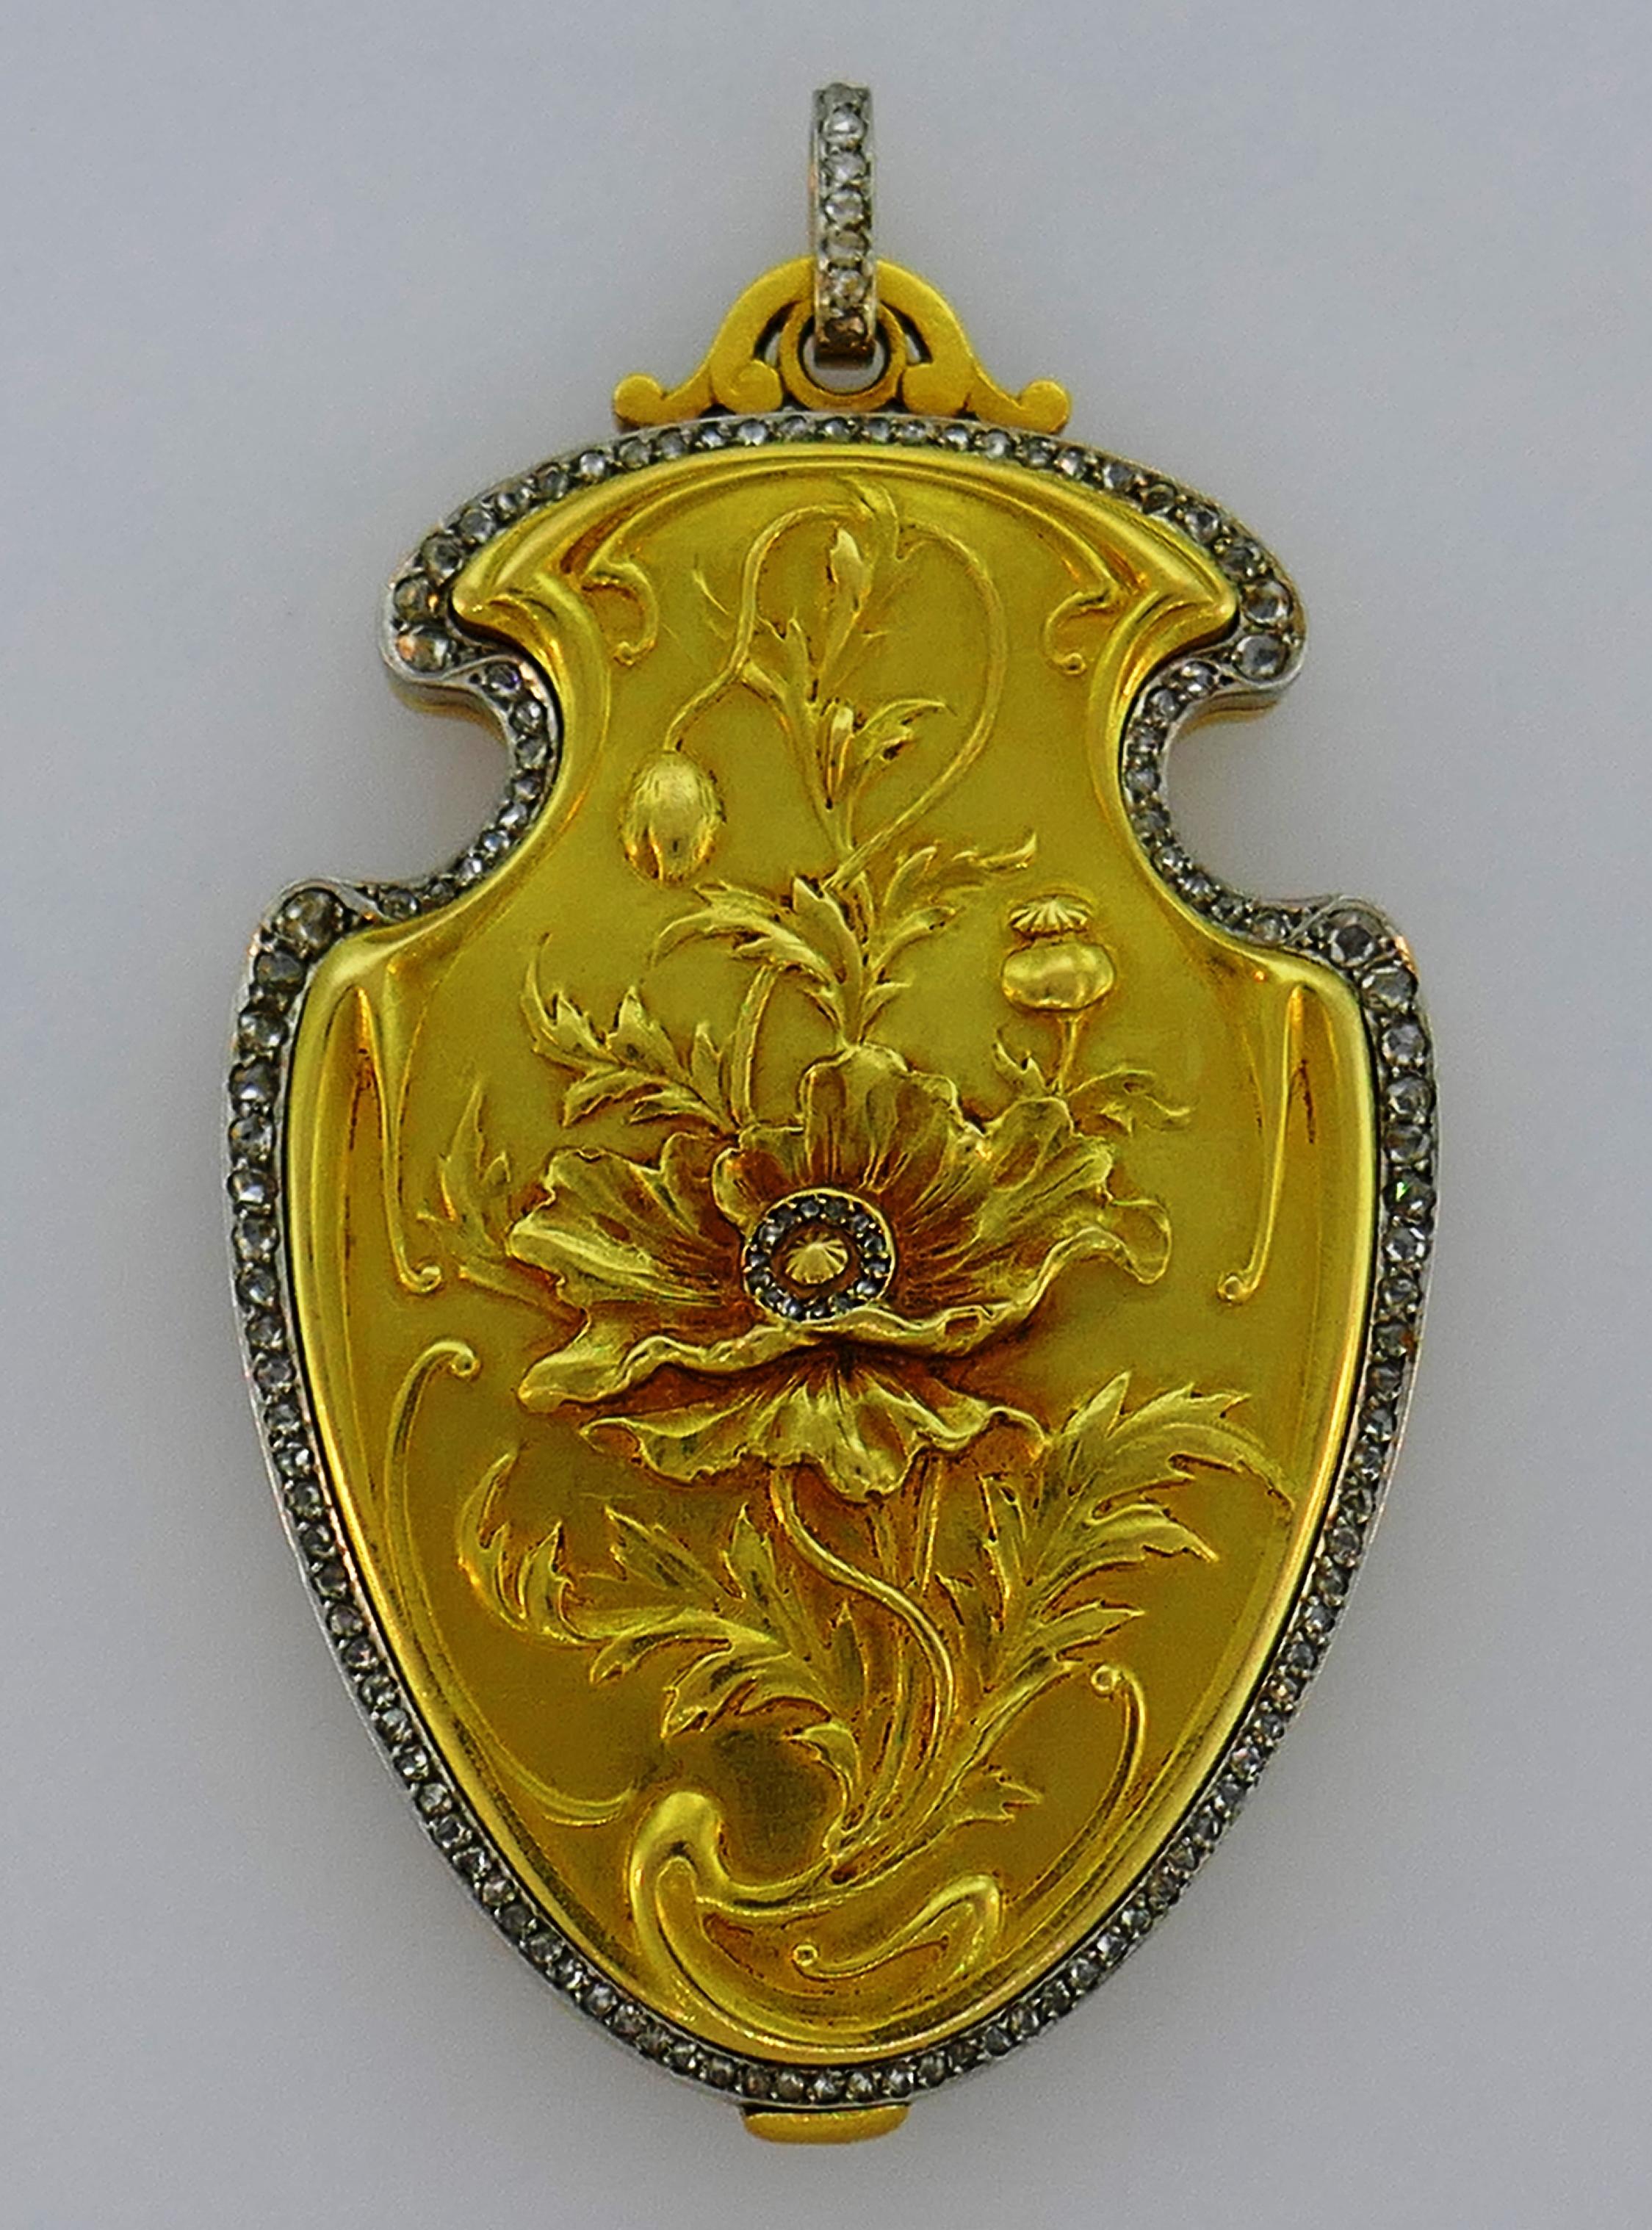 Amazing Art Nouveau pendant created in France in the 1930s. 
Made of 18 karat yellow and white gold and accented with rose cut diamonds. Beautiful work on gold! Unusual, artsy and wearable, the pendant is a great addition to your jewelry